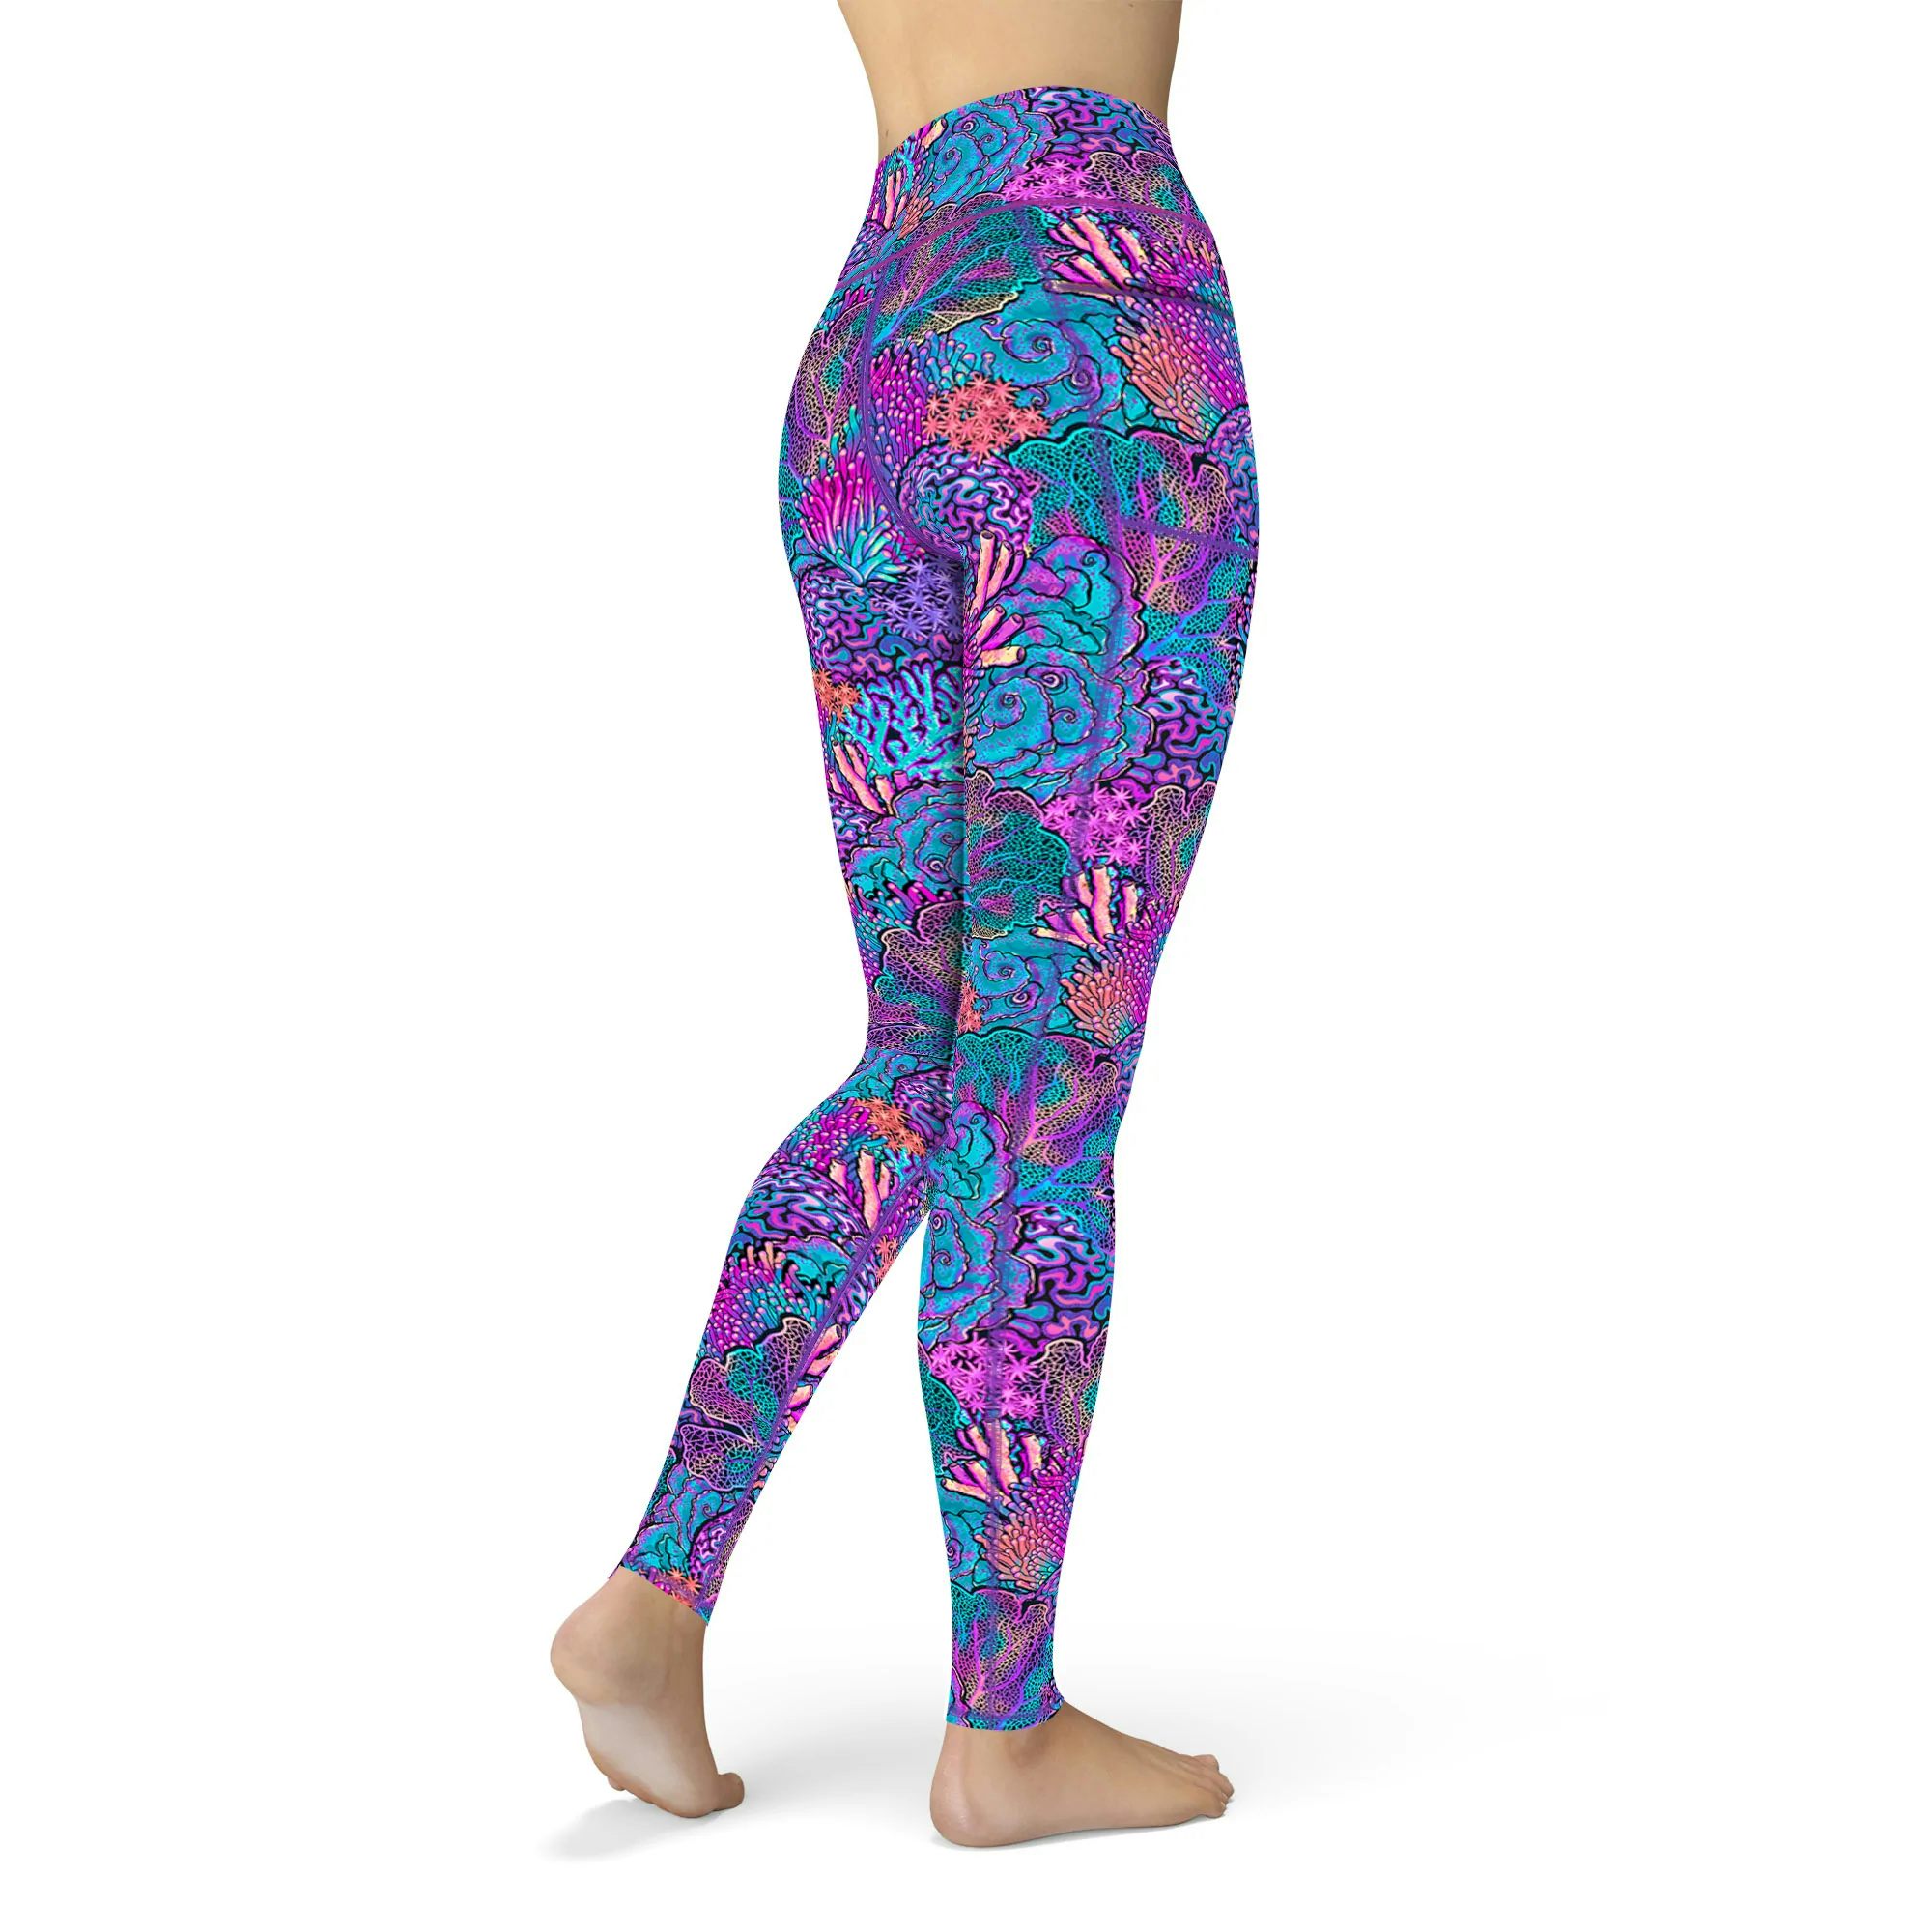 Spacefish Army Recycled Leggings (Women’s)